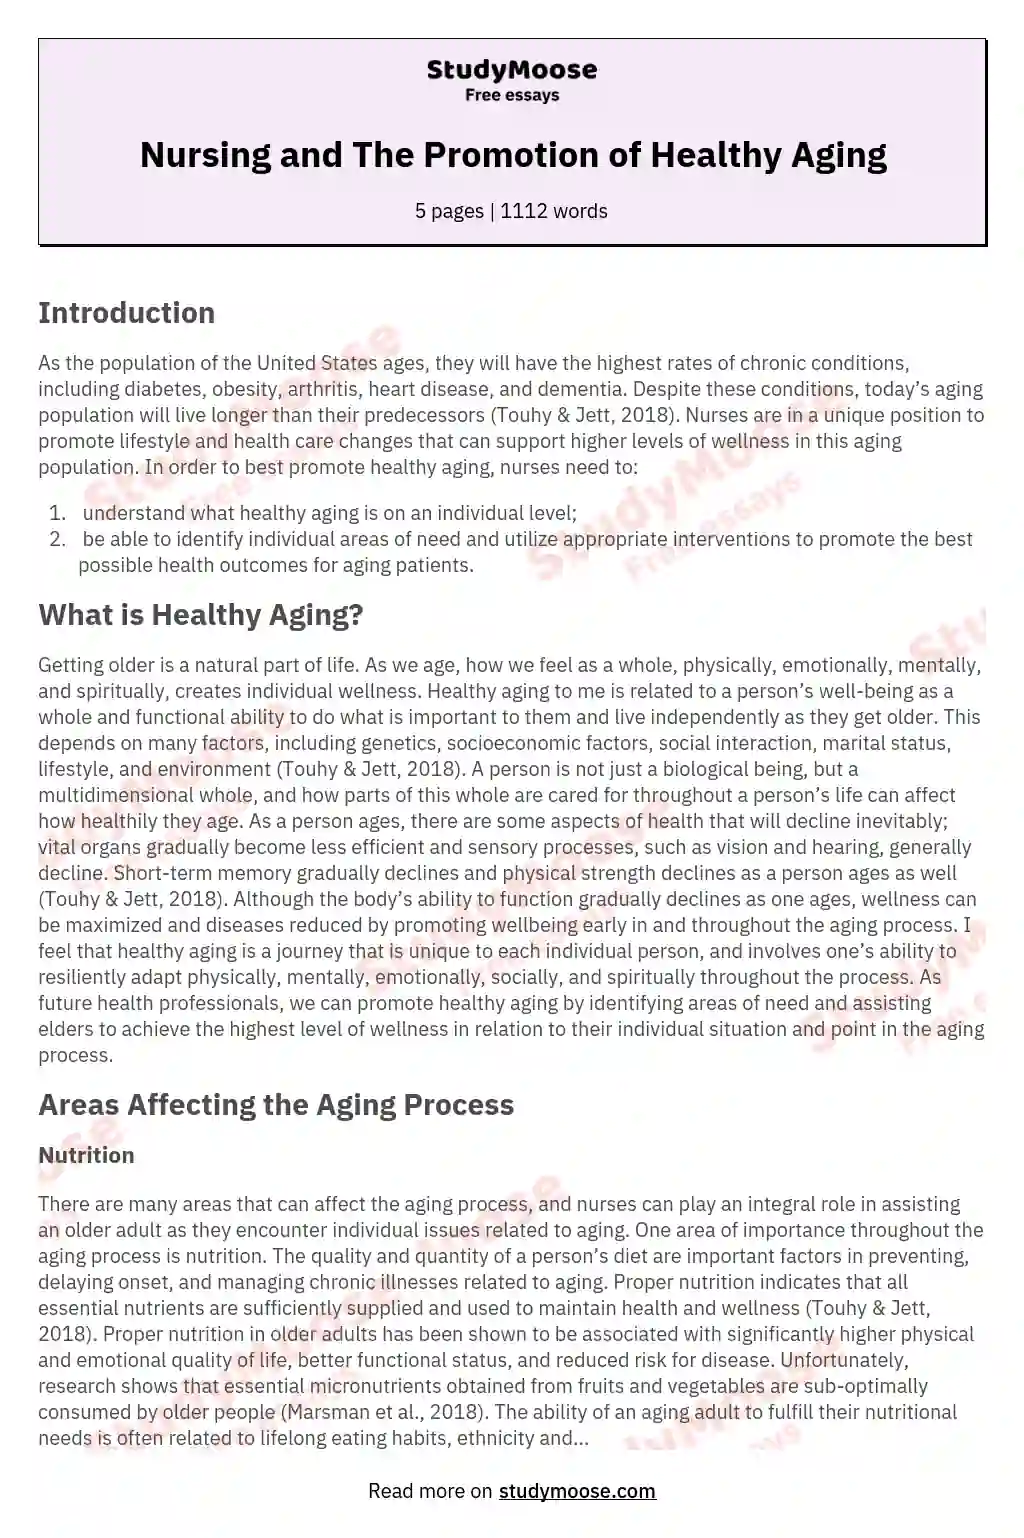 Nursing and The Promotion of Healthy Aging essay